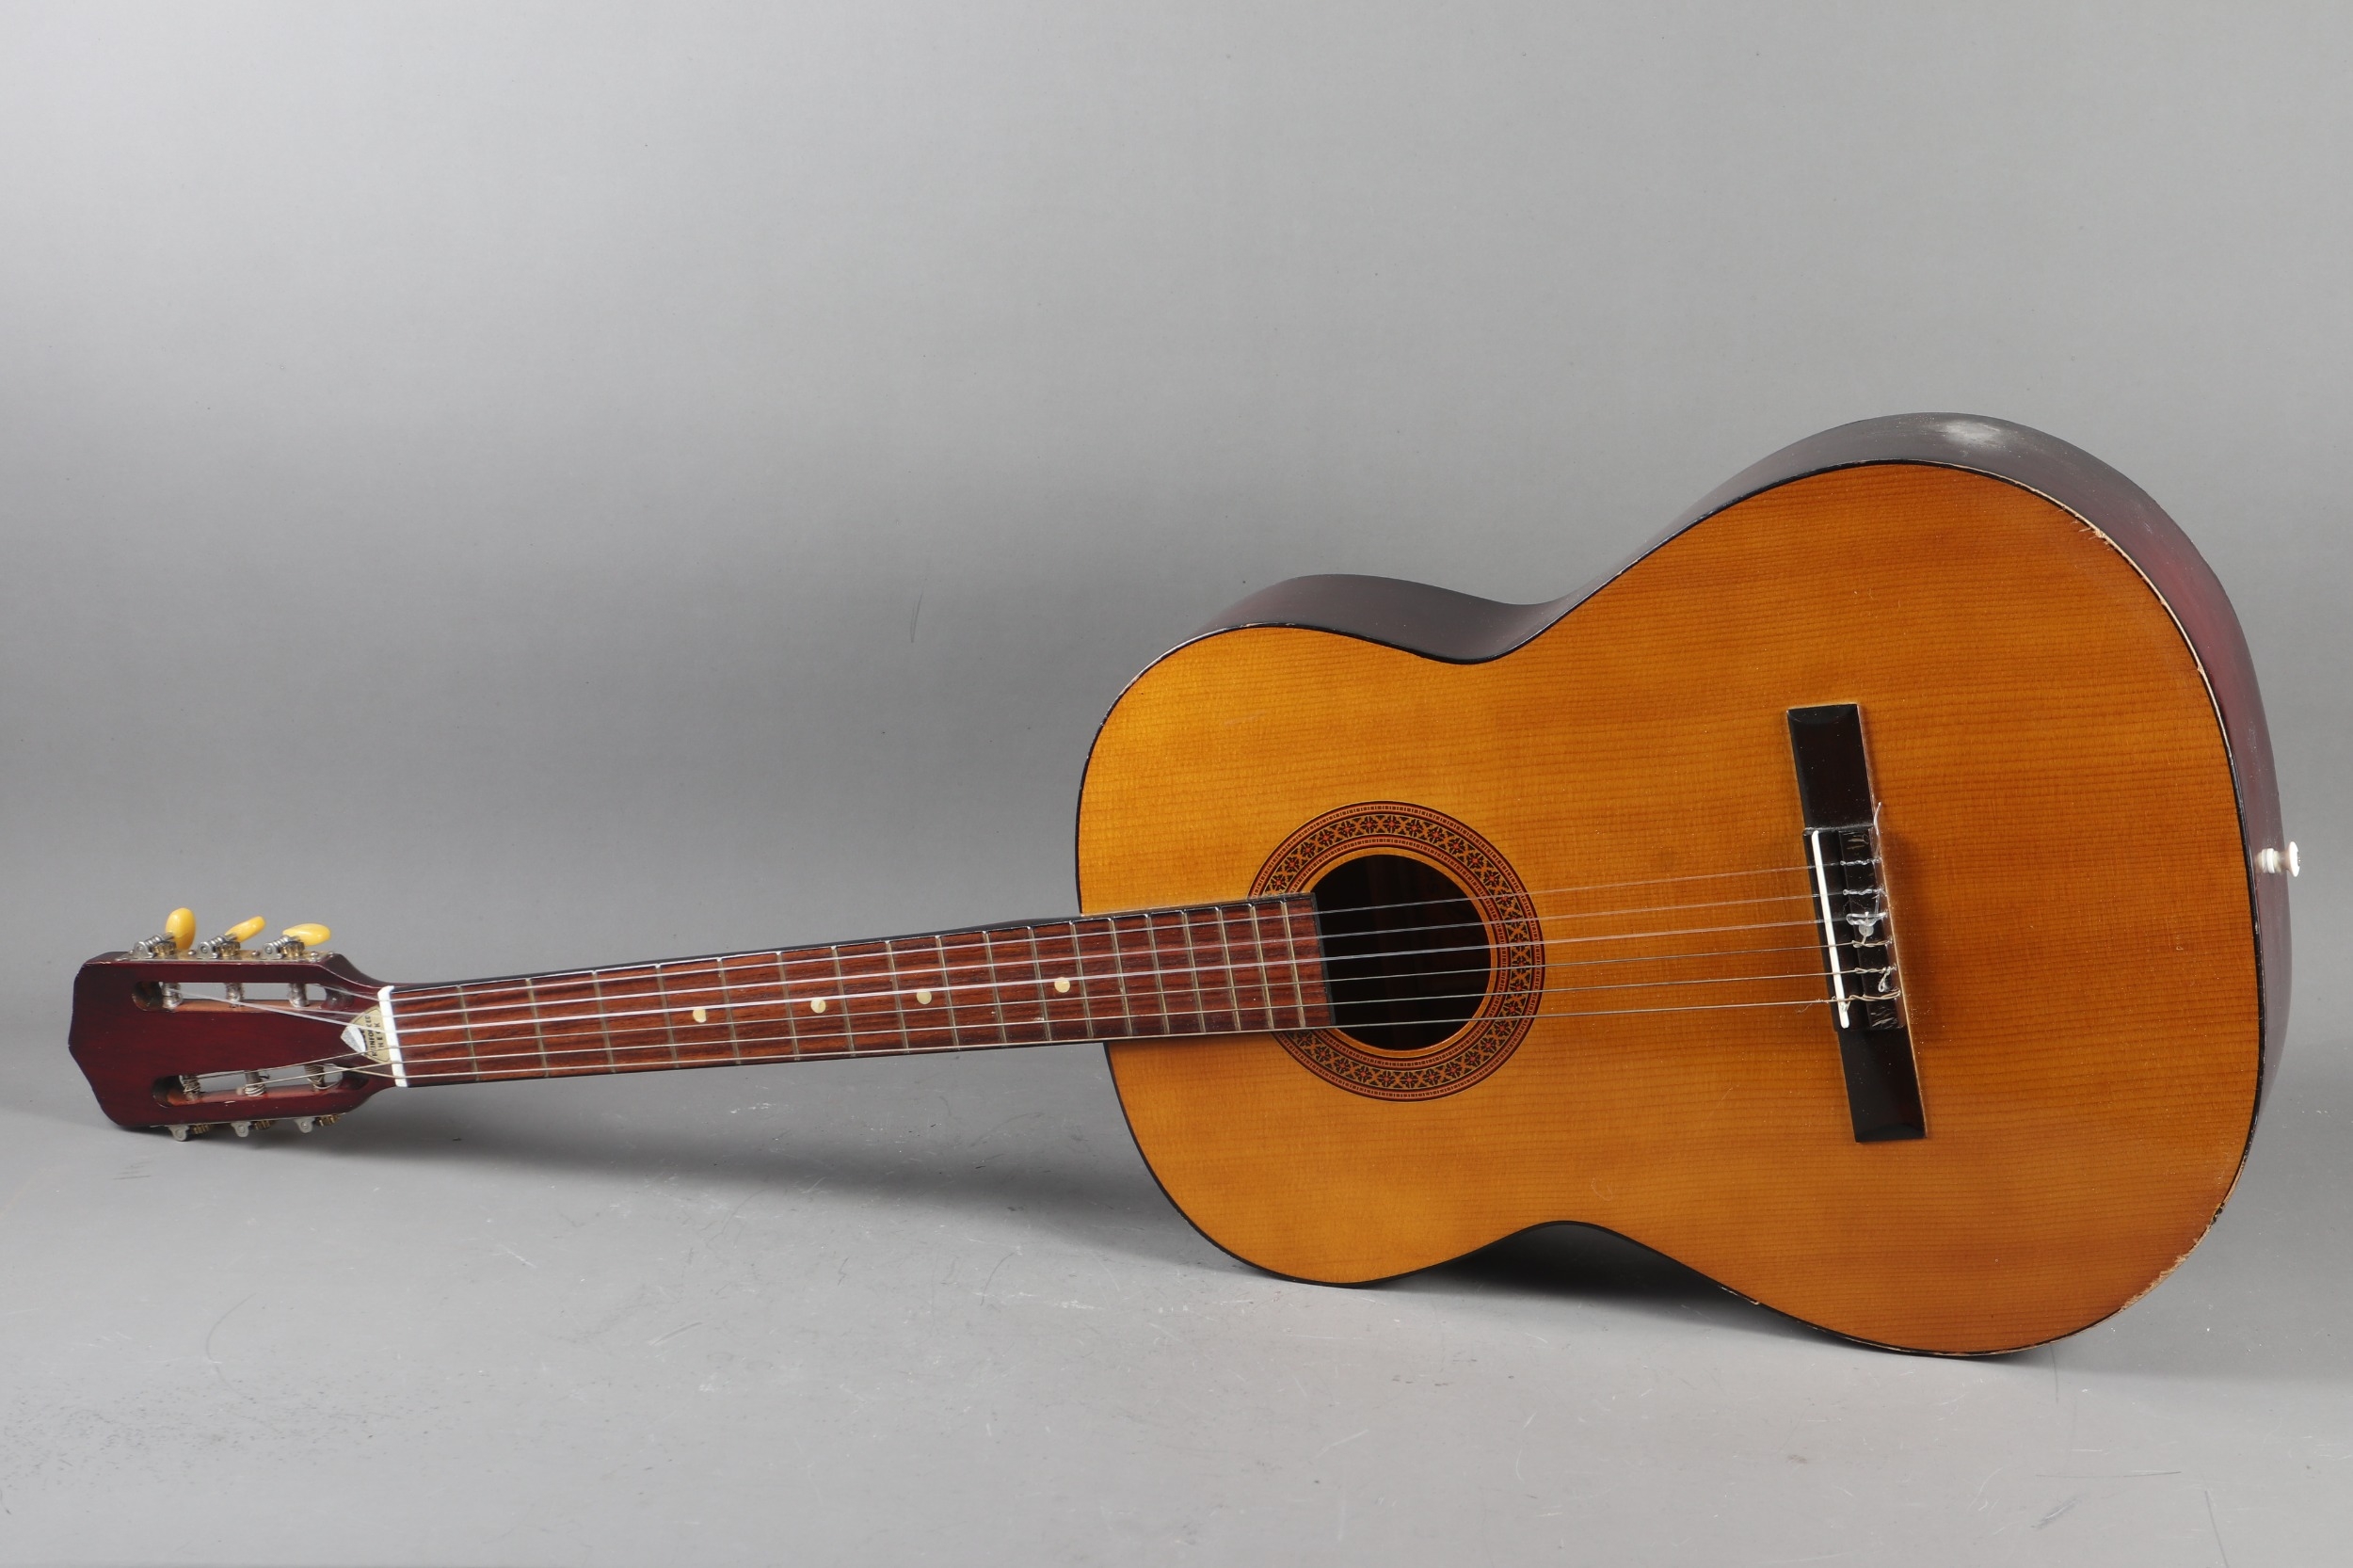 A Japanese acoustic guitar, in case